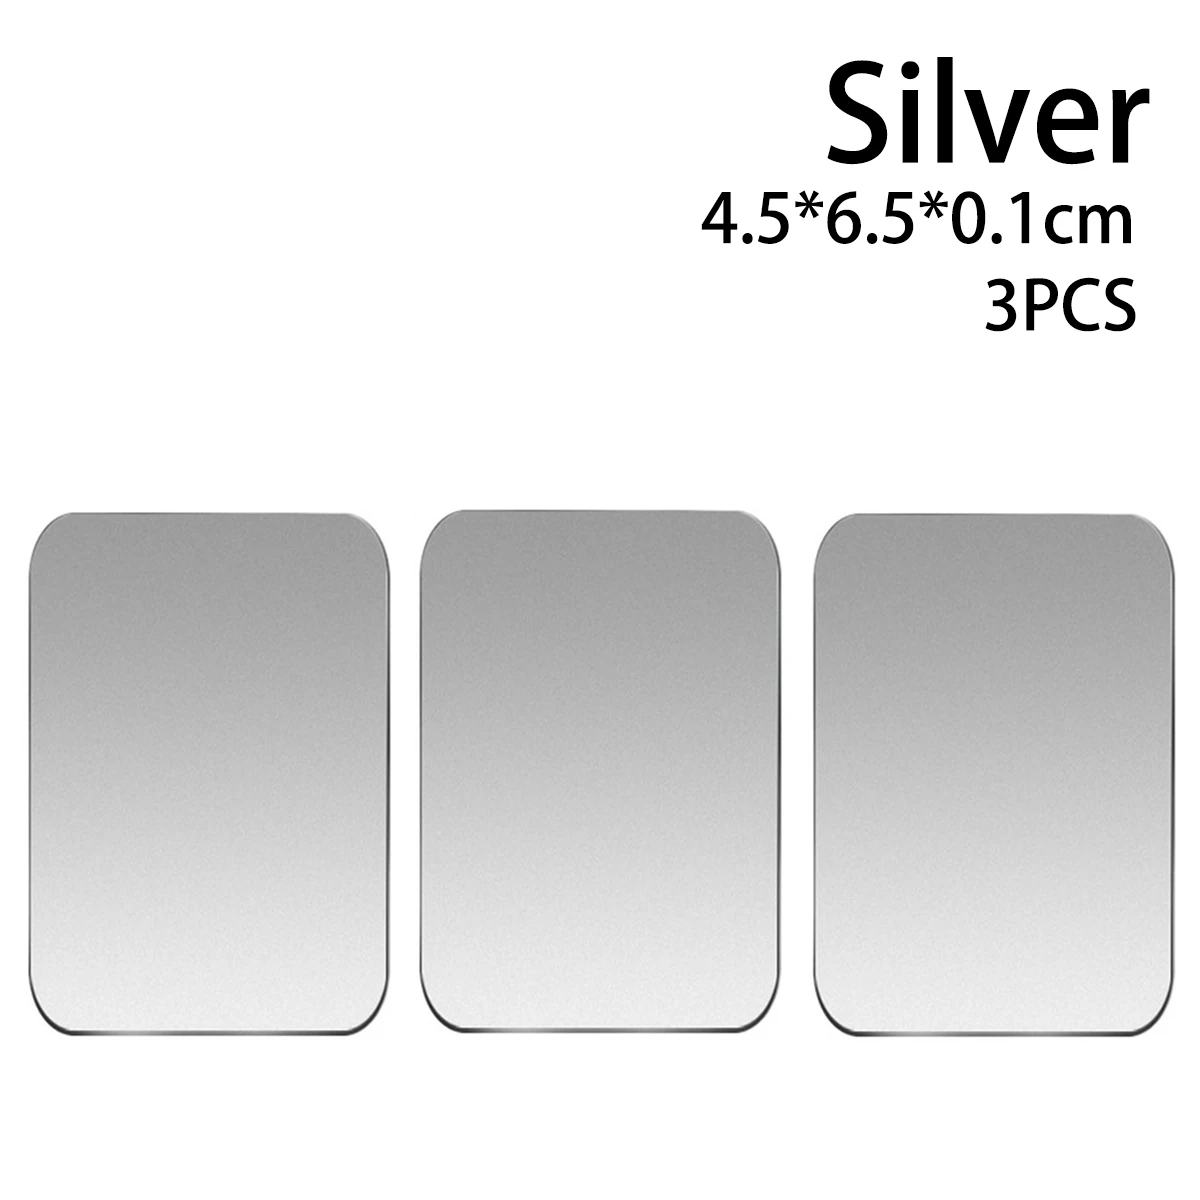 Car Magnetic Bracket Metal Plate Car Disk Magnet Plate Ultra-Thin Sticker Magnetic Phone Bracket GPS Universal Accessories - Цвет: Silver Square3pieces